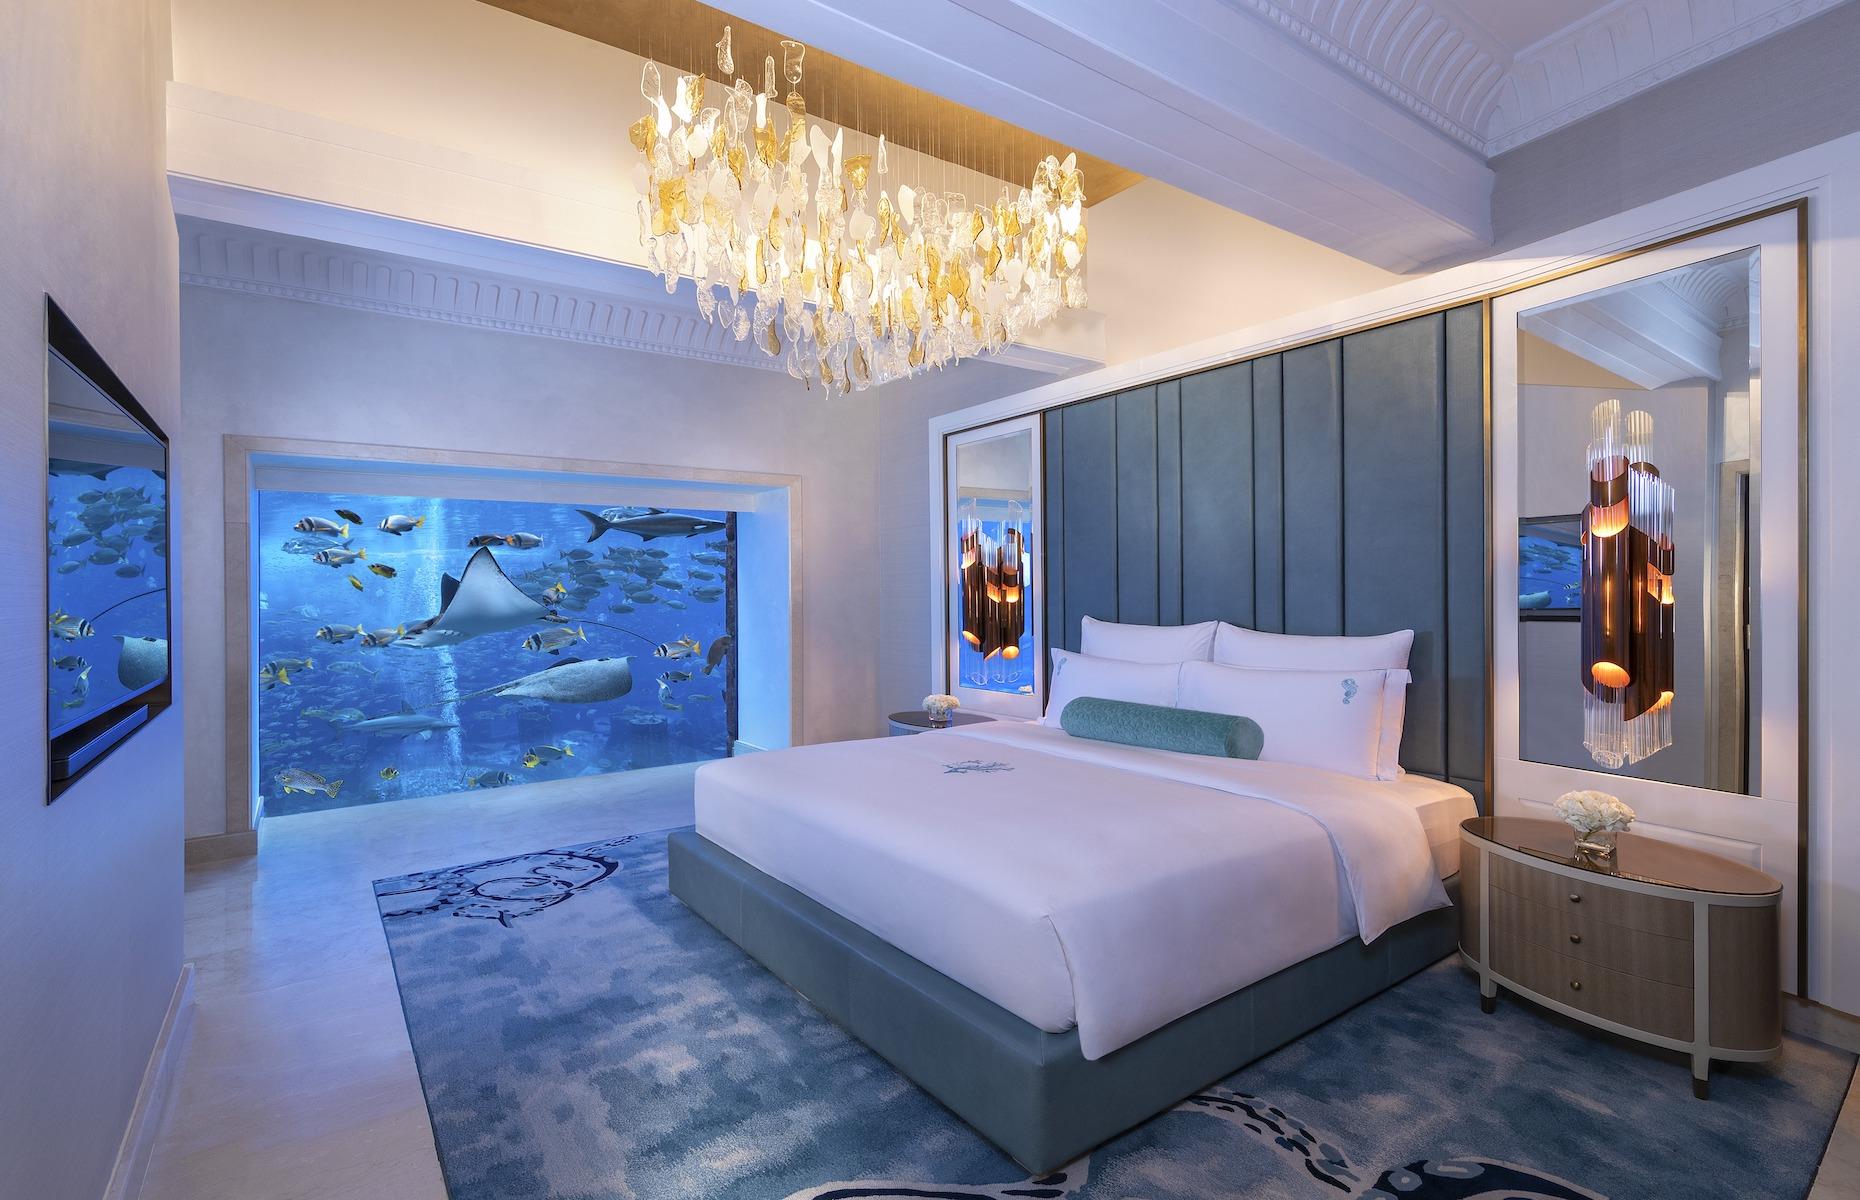 <p>Standing out from the crowd in Dubai's ostentatious hotel scene is quite a feat but <a href="https://www.atlantis.com/dubai/atlantis-the-palm">Atlantis, The Palm </a>hotel does exactly that. Among the 1,500-plus rooms of this palatial hotel lie two underwater suites, aptly named Poseidon and Neptune, where guests can sleep next to a vast fish-filled lagoon while lapping up every conceivable luxury.</p>